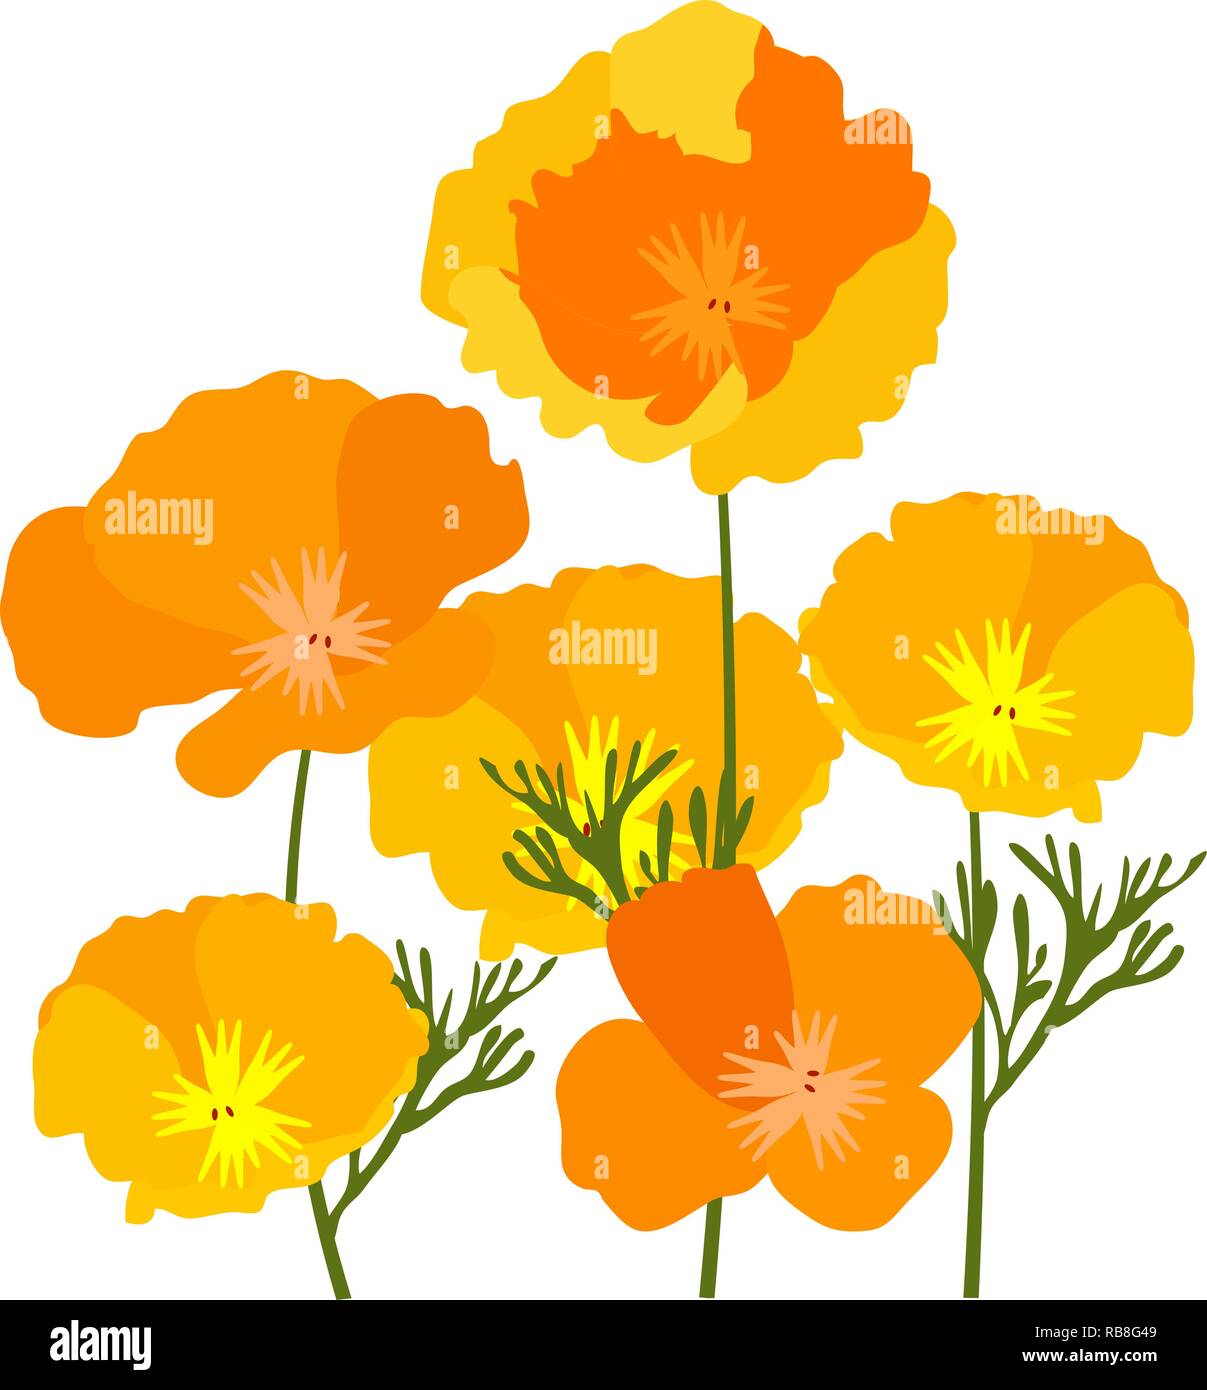 vector illustration of California state yellow and orange poppies. Stock Vector